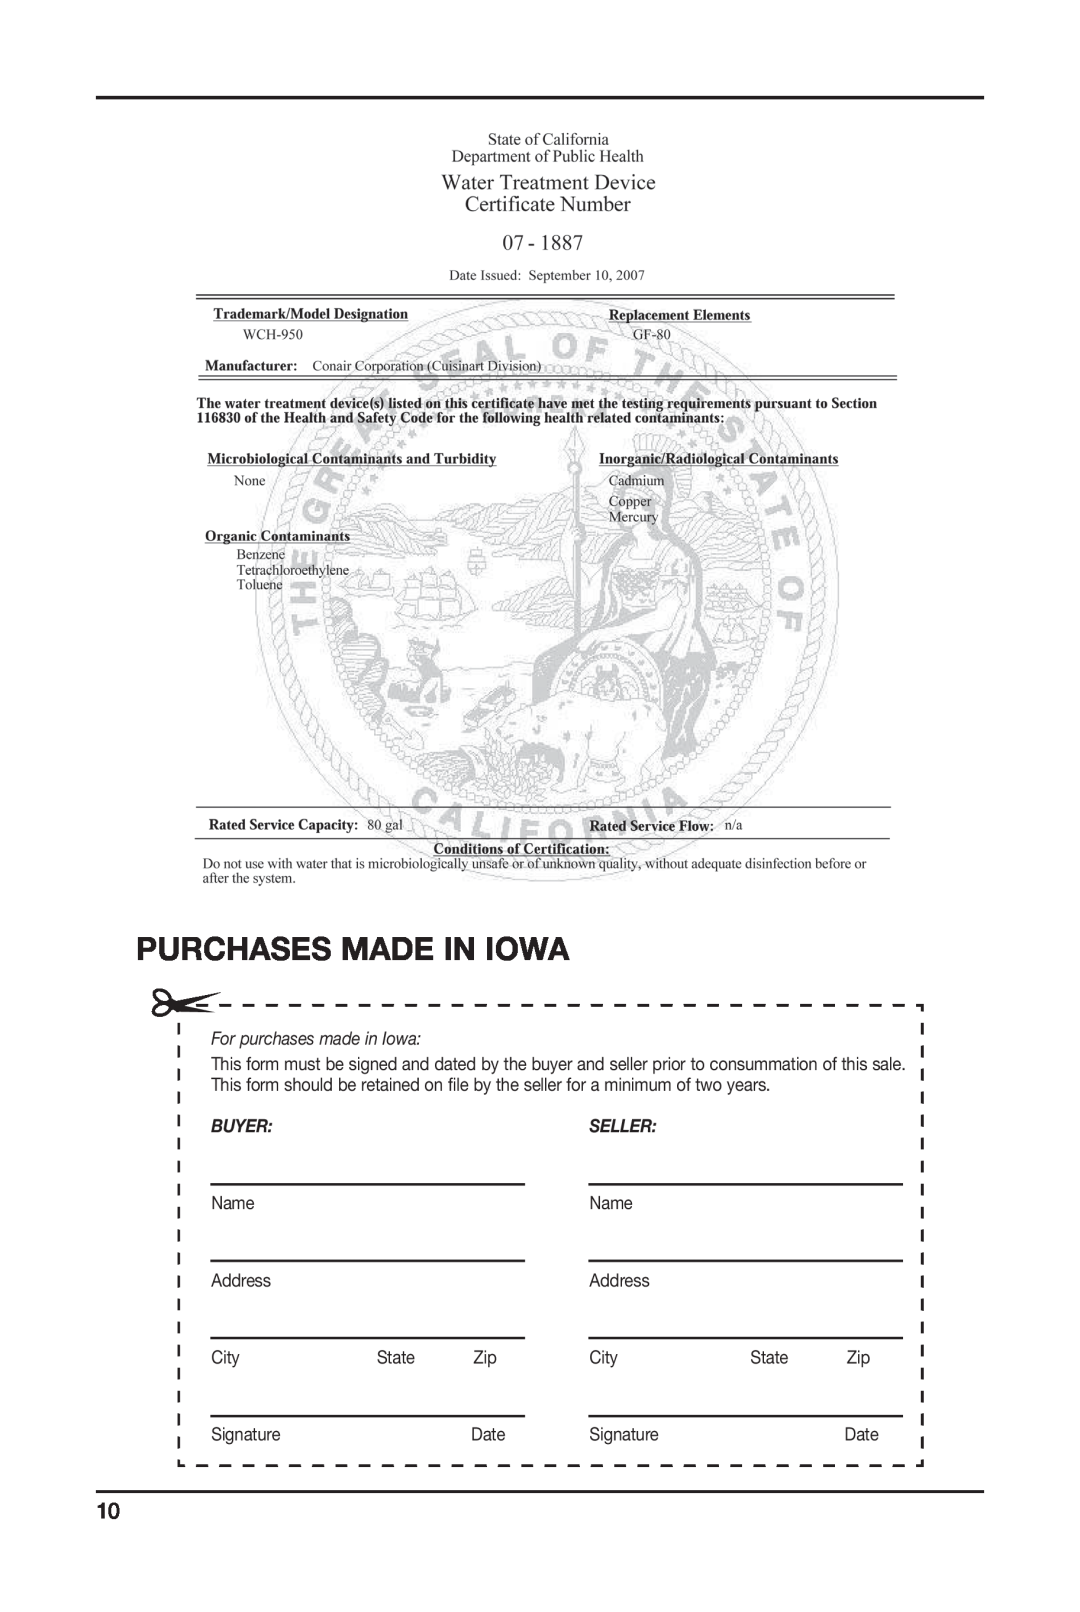 Cuisinart WCH-950 manual Purchases Made In Iowa, For purchases made in Iowa, Buyer Seller 